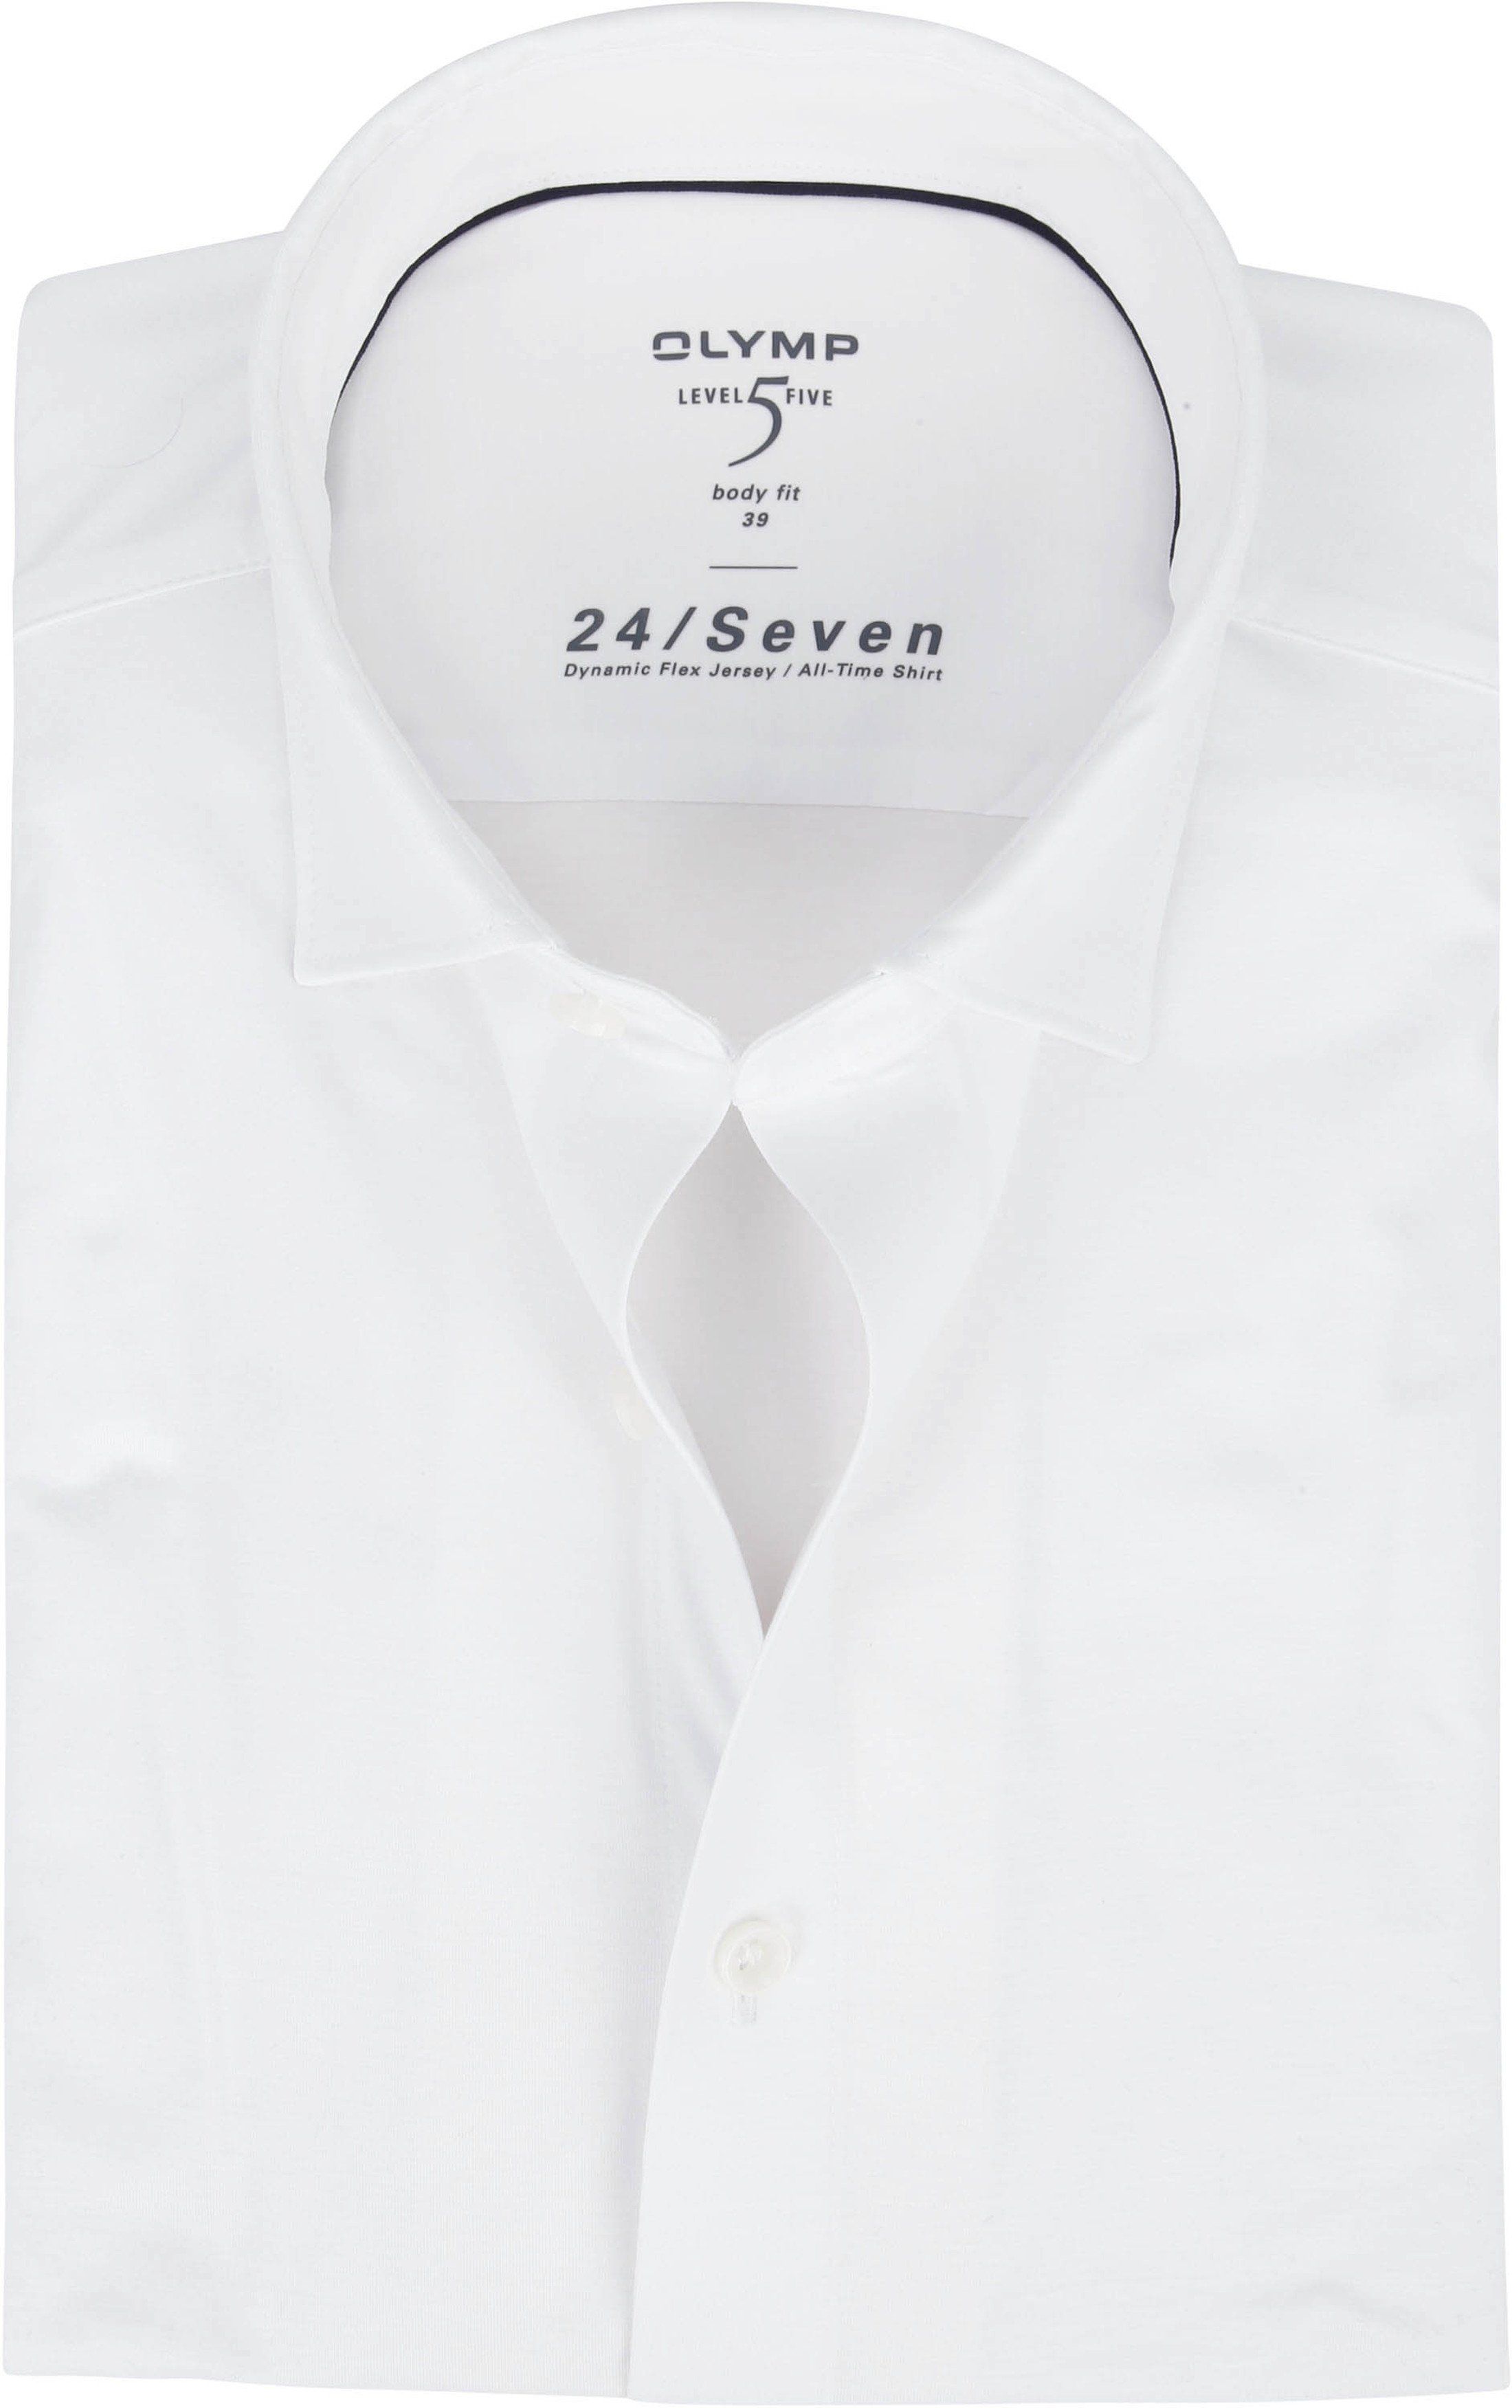 OLYMP Chemise Level 5 24/Seven Blanc taille 37